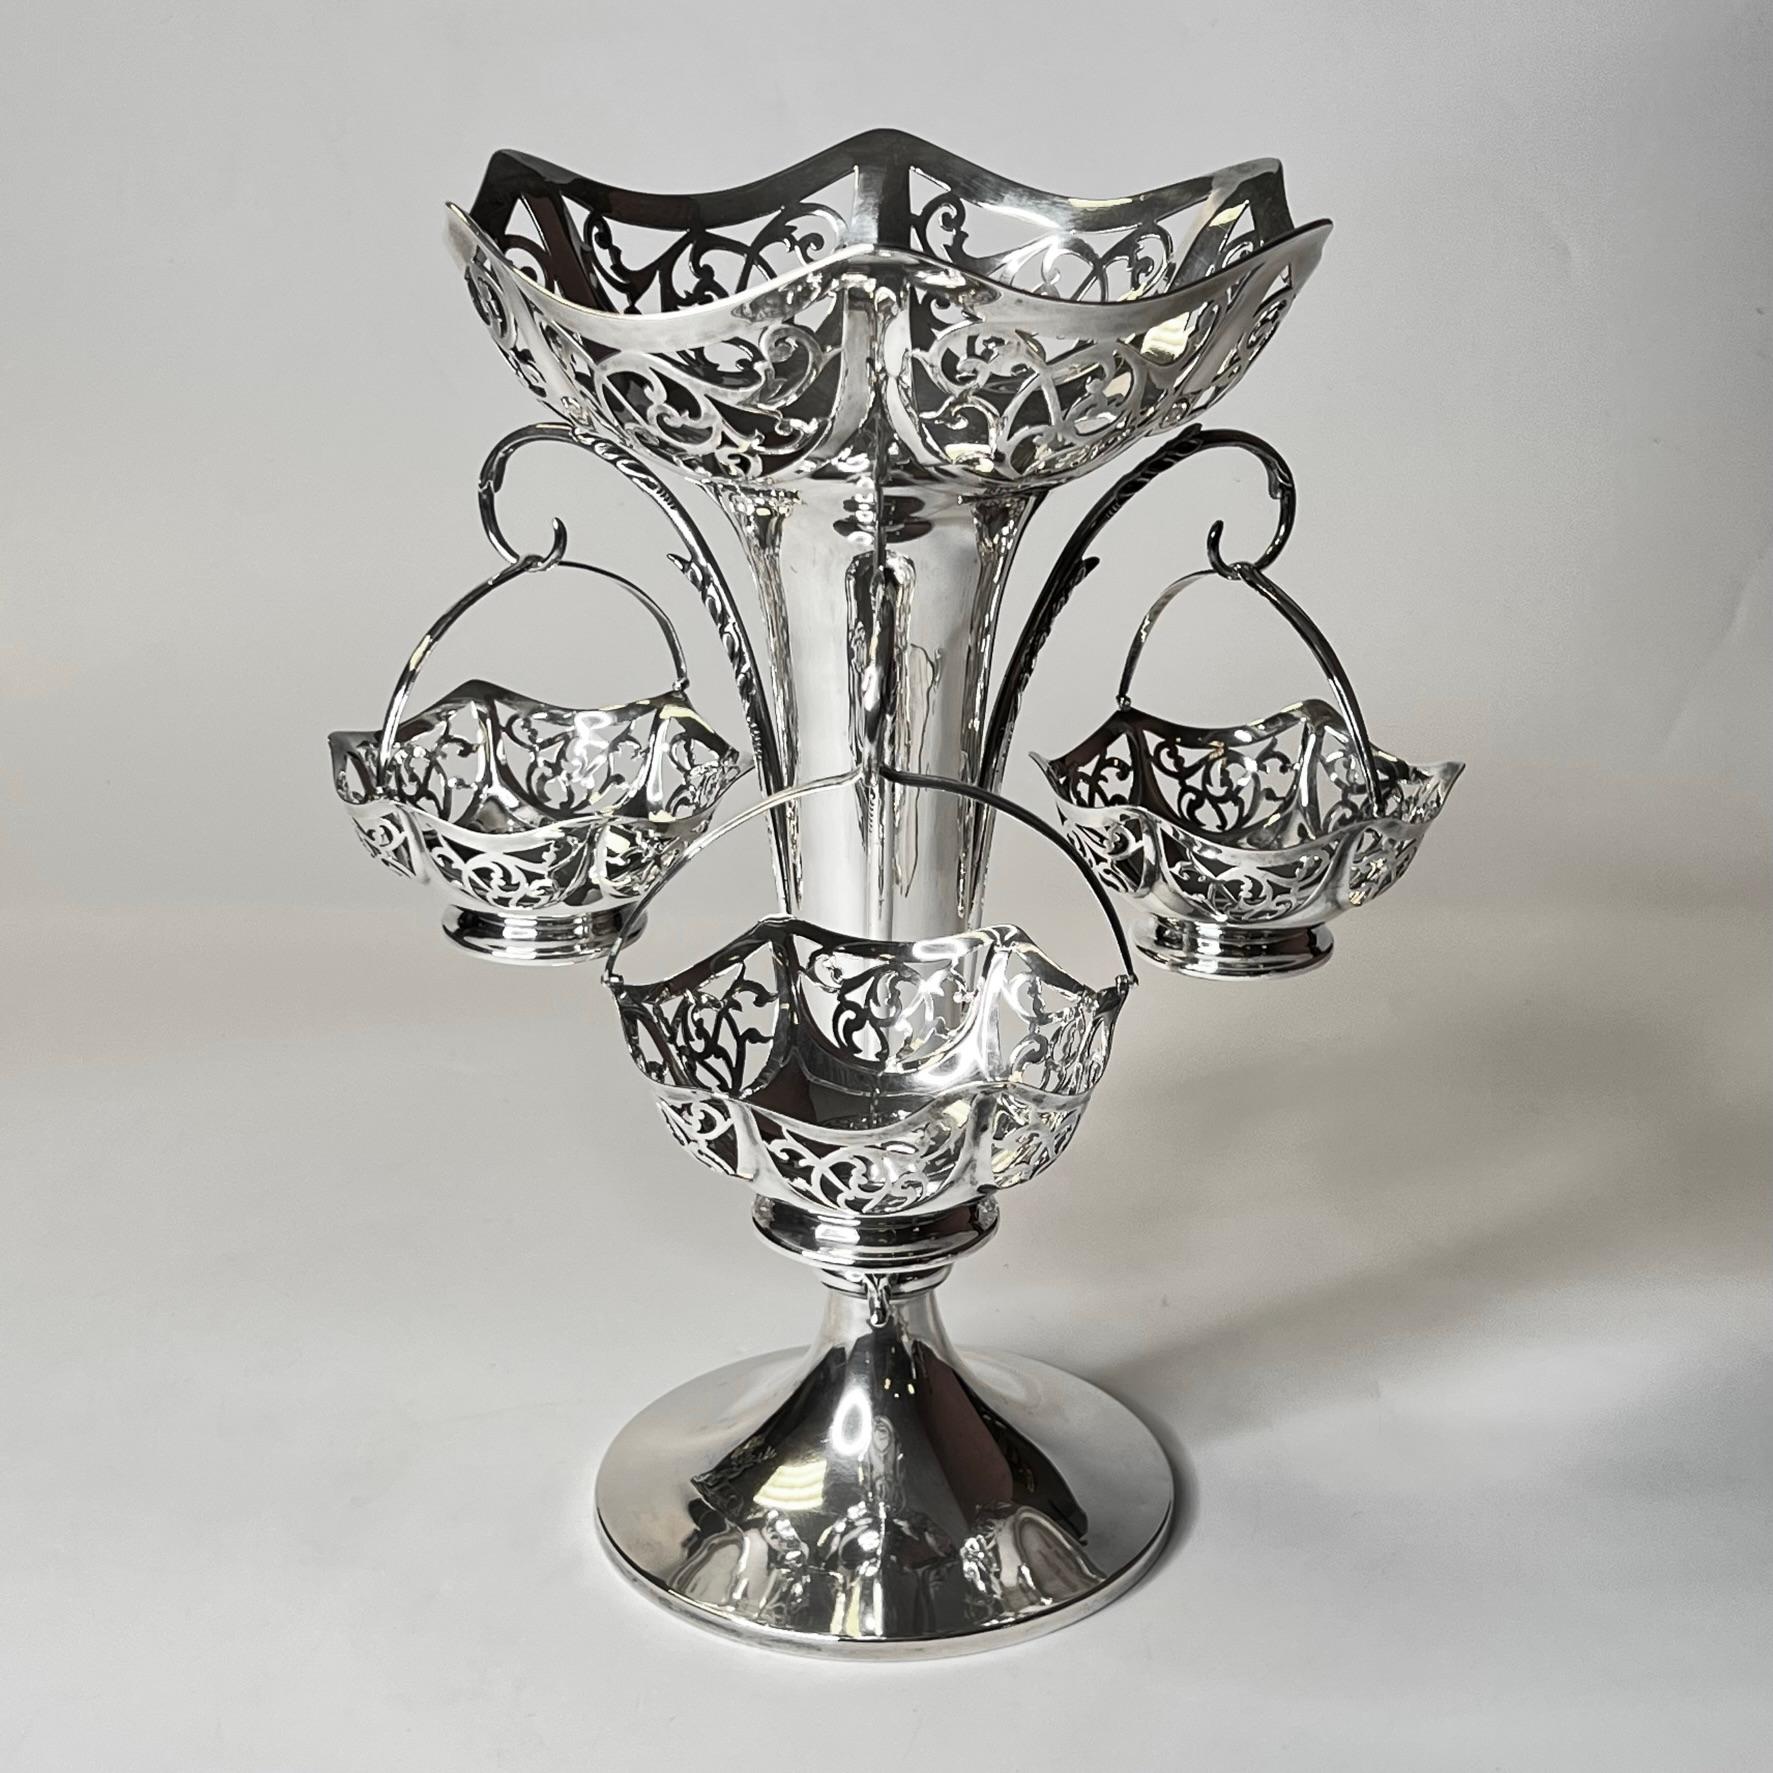 Our exceptional sterling silver centerpiece from the Art Nouveau and Arts and Crafts period comes from the London firm of Goldsmiths & Silversmiths Company Ltd. It features a central vase with reticulated rim of organic scrolls and three handled